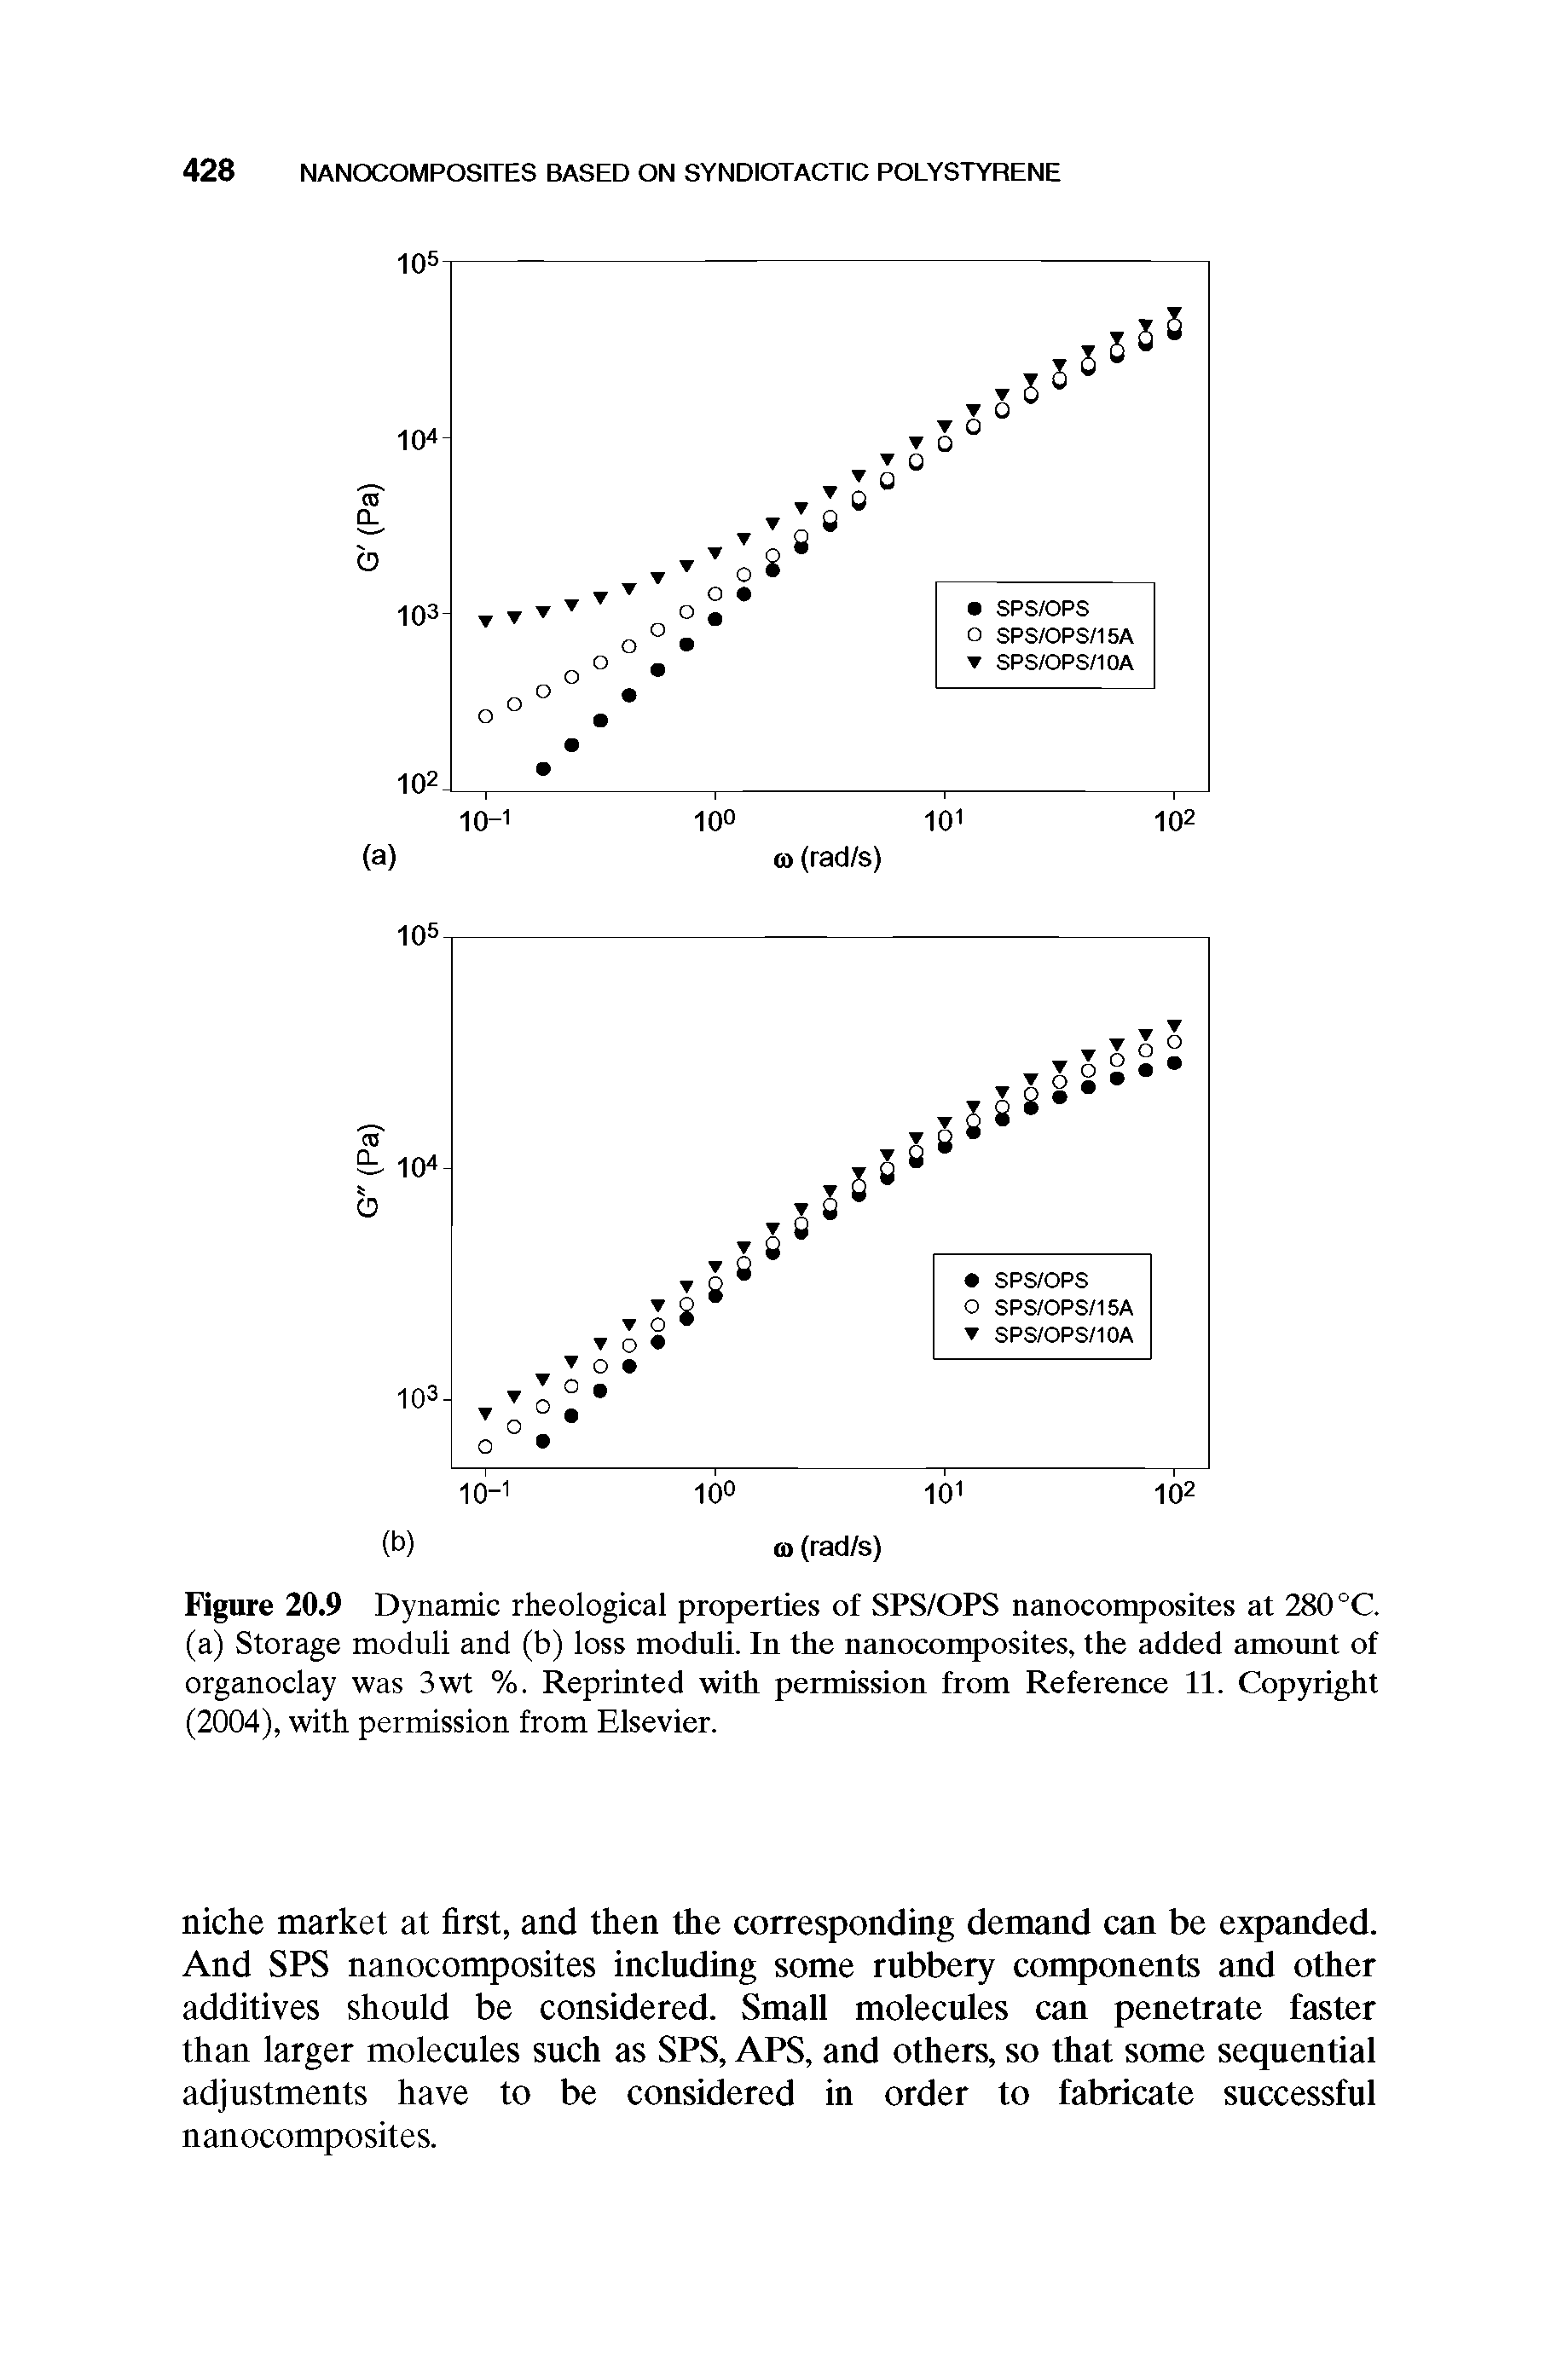 Figure 20.9 Dynamic rheological properties of SPS/OPS nanocomposites at 280 °C. (a) Storage moduli and (b) loss moduli. In the nanocomposites, the added amount of organoclay was 3wt %. Reprinted with permission from Reference 11. Copyright (2004), with permission from Elsevier.